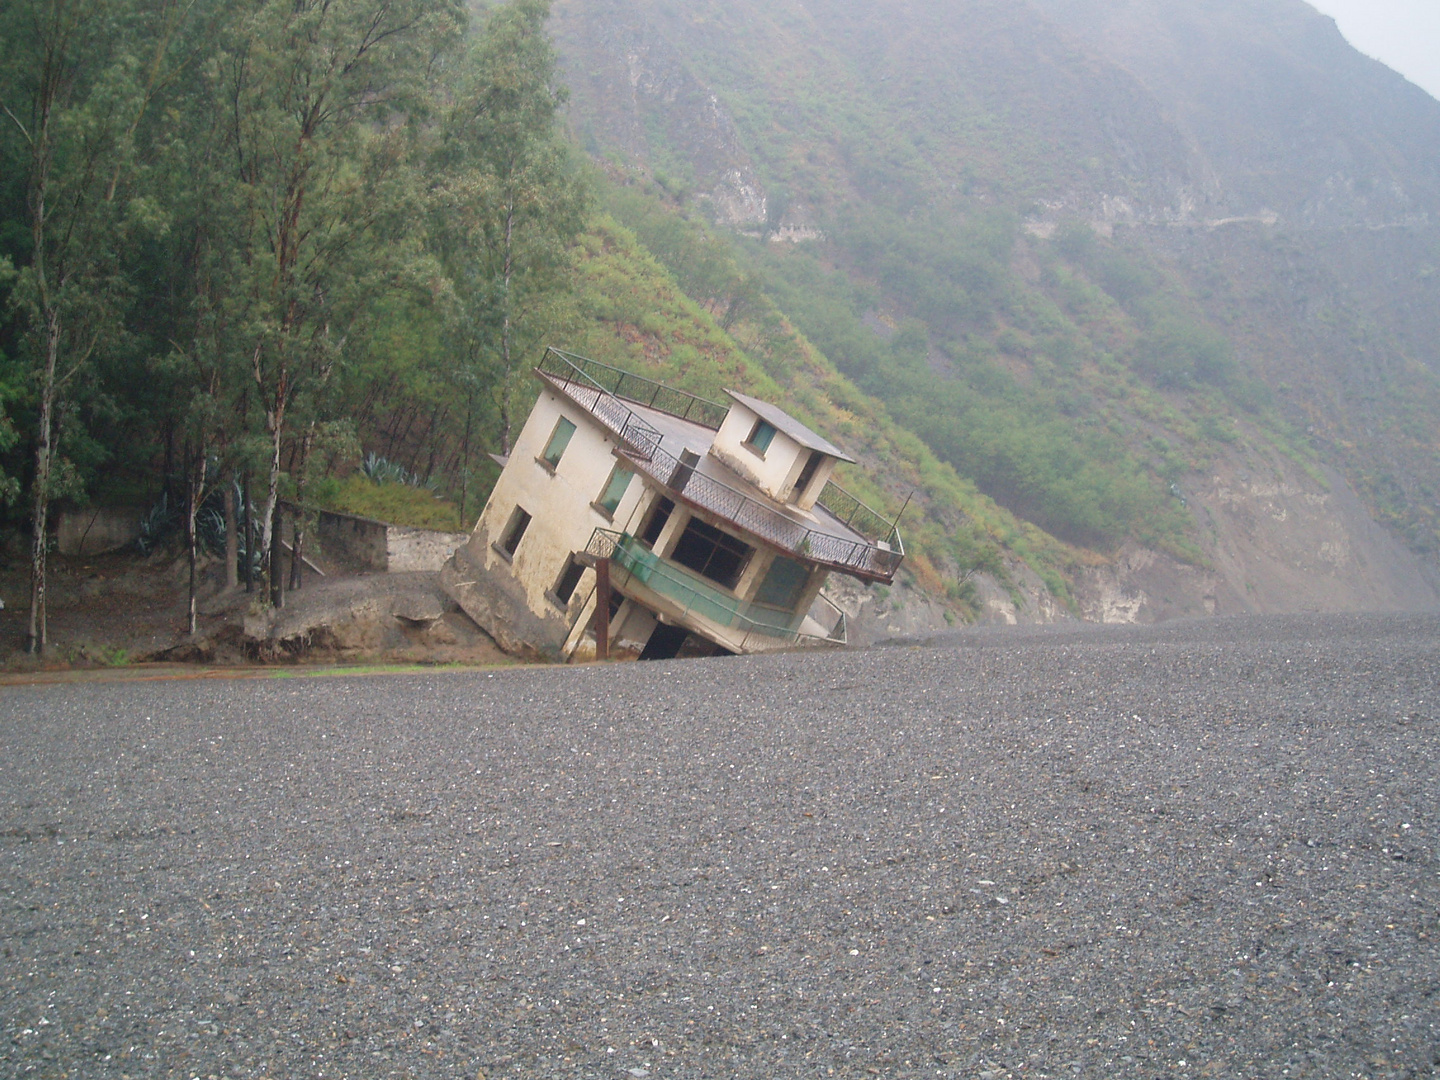 In God's Country - Station Swallowed by Debris Flow